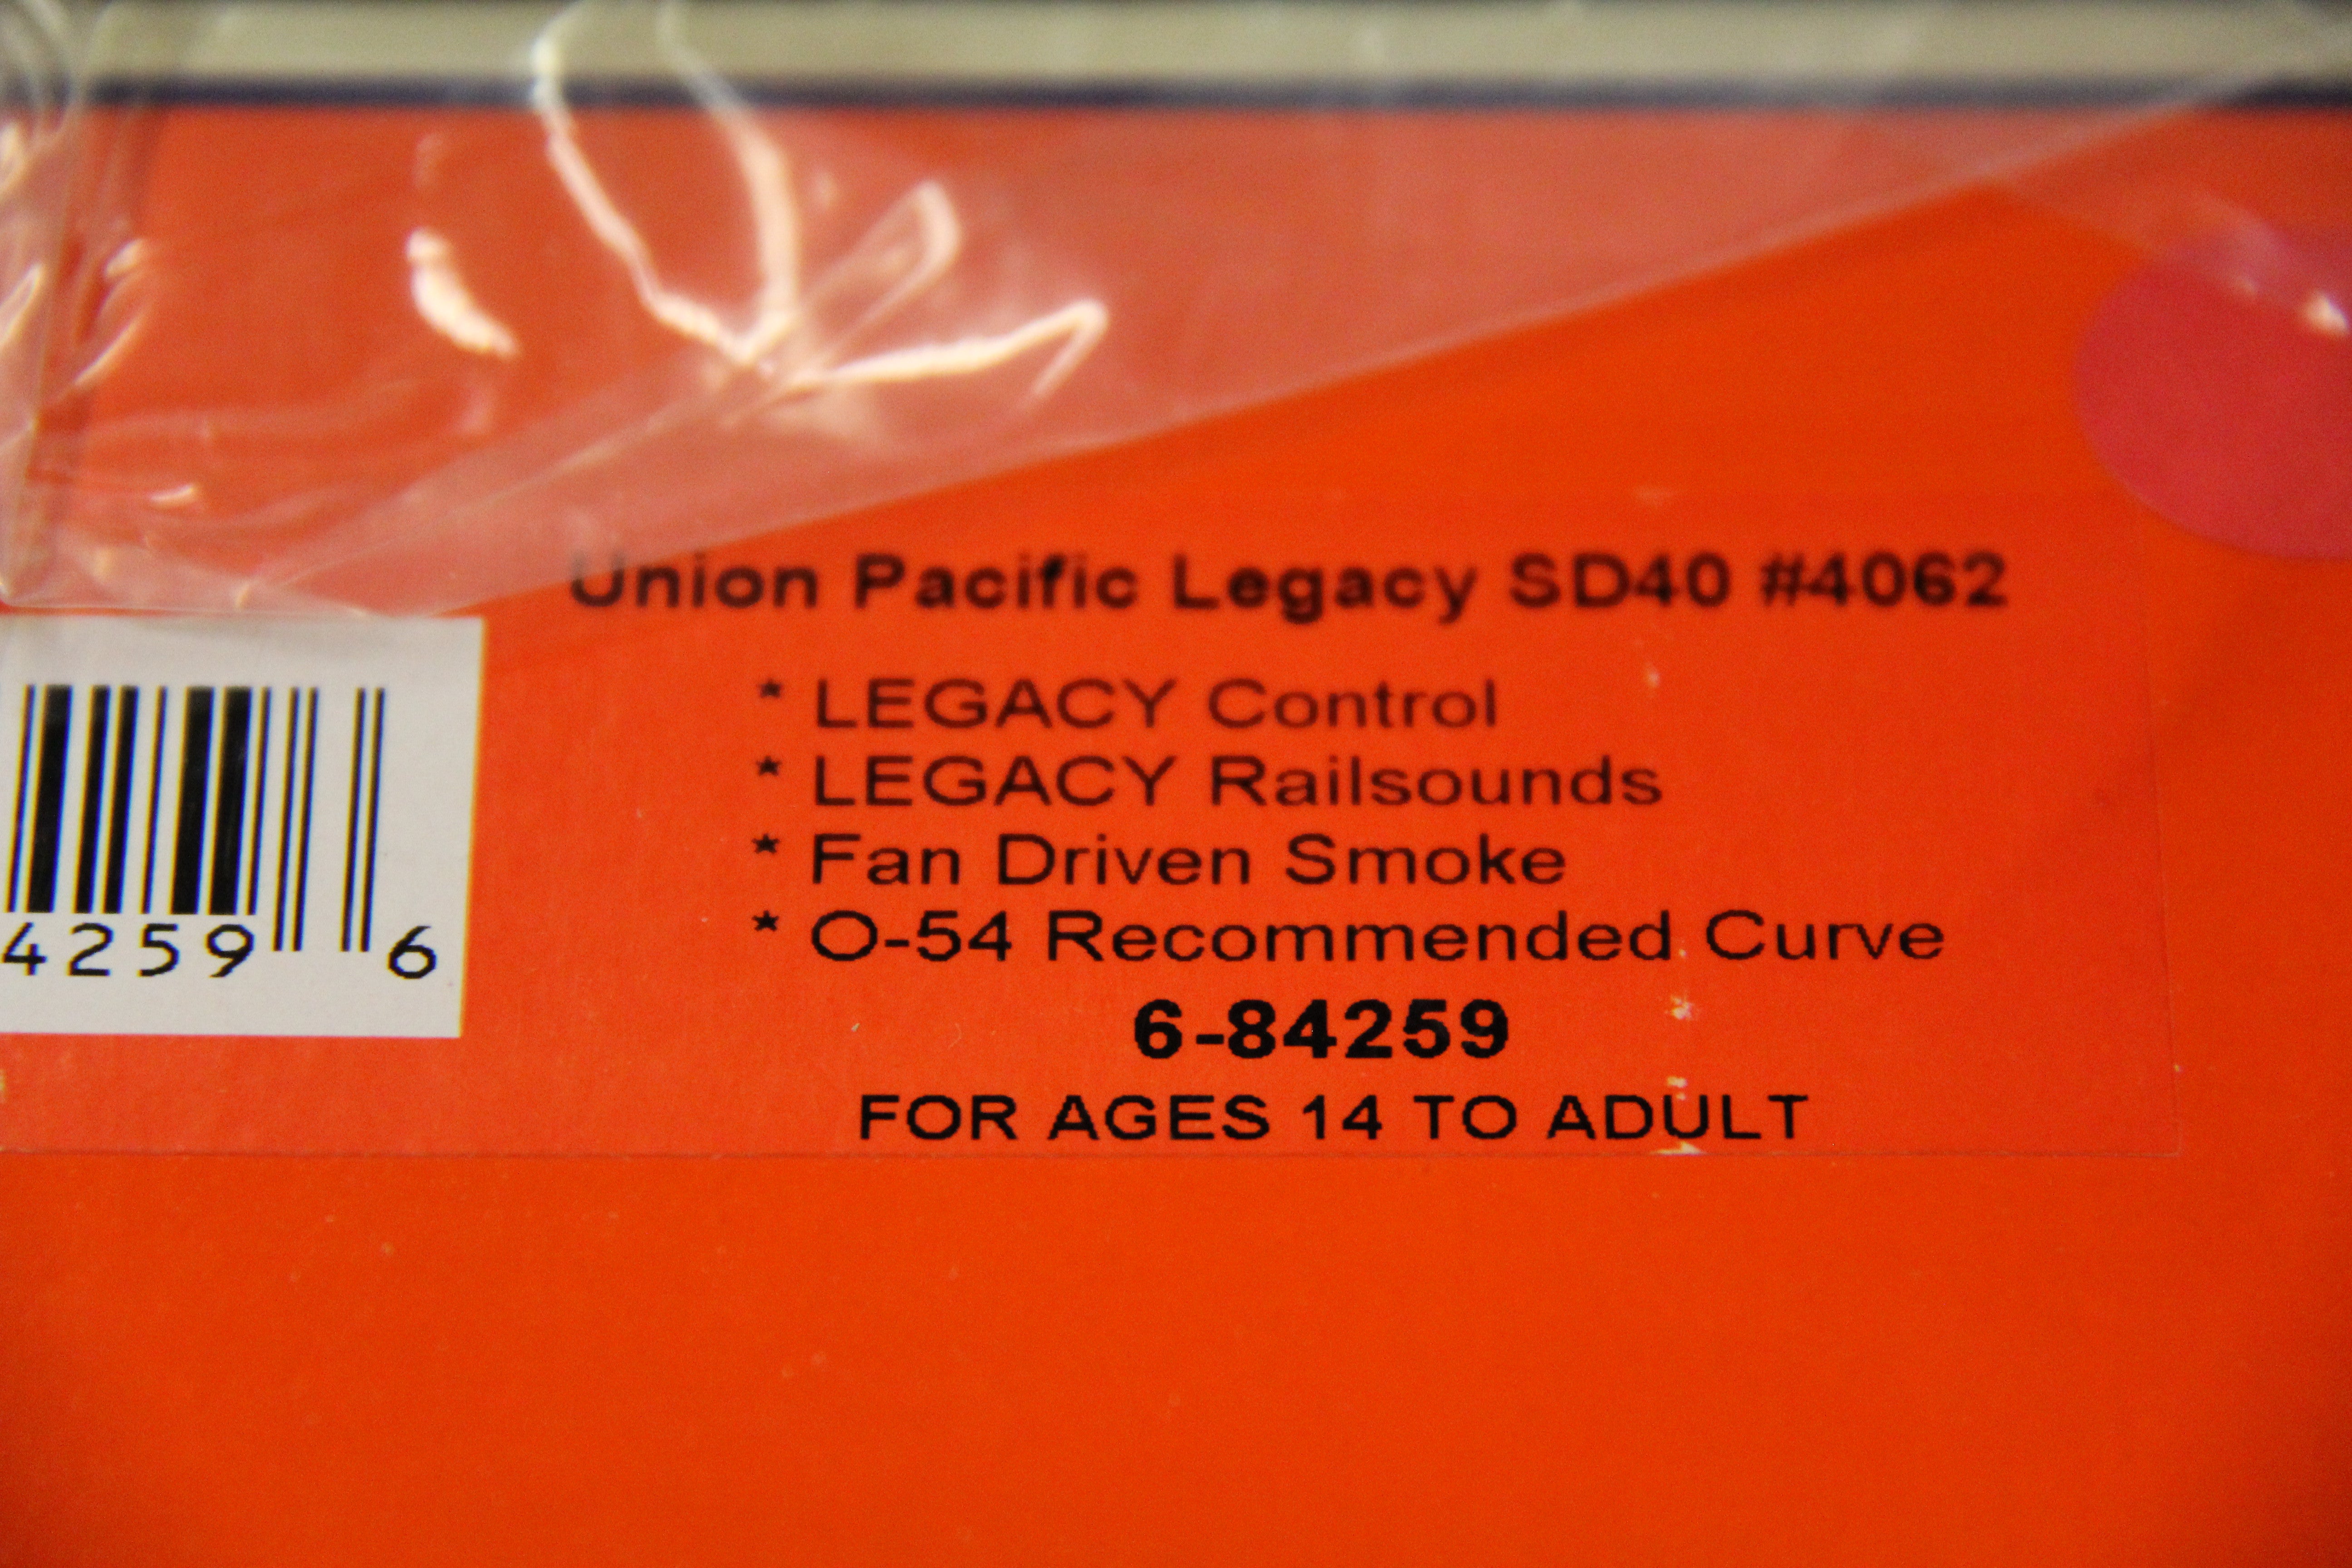 Lionel 6-84259 Union Pacific Legacy SD40 #4062-Second hand-M3878